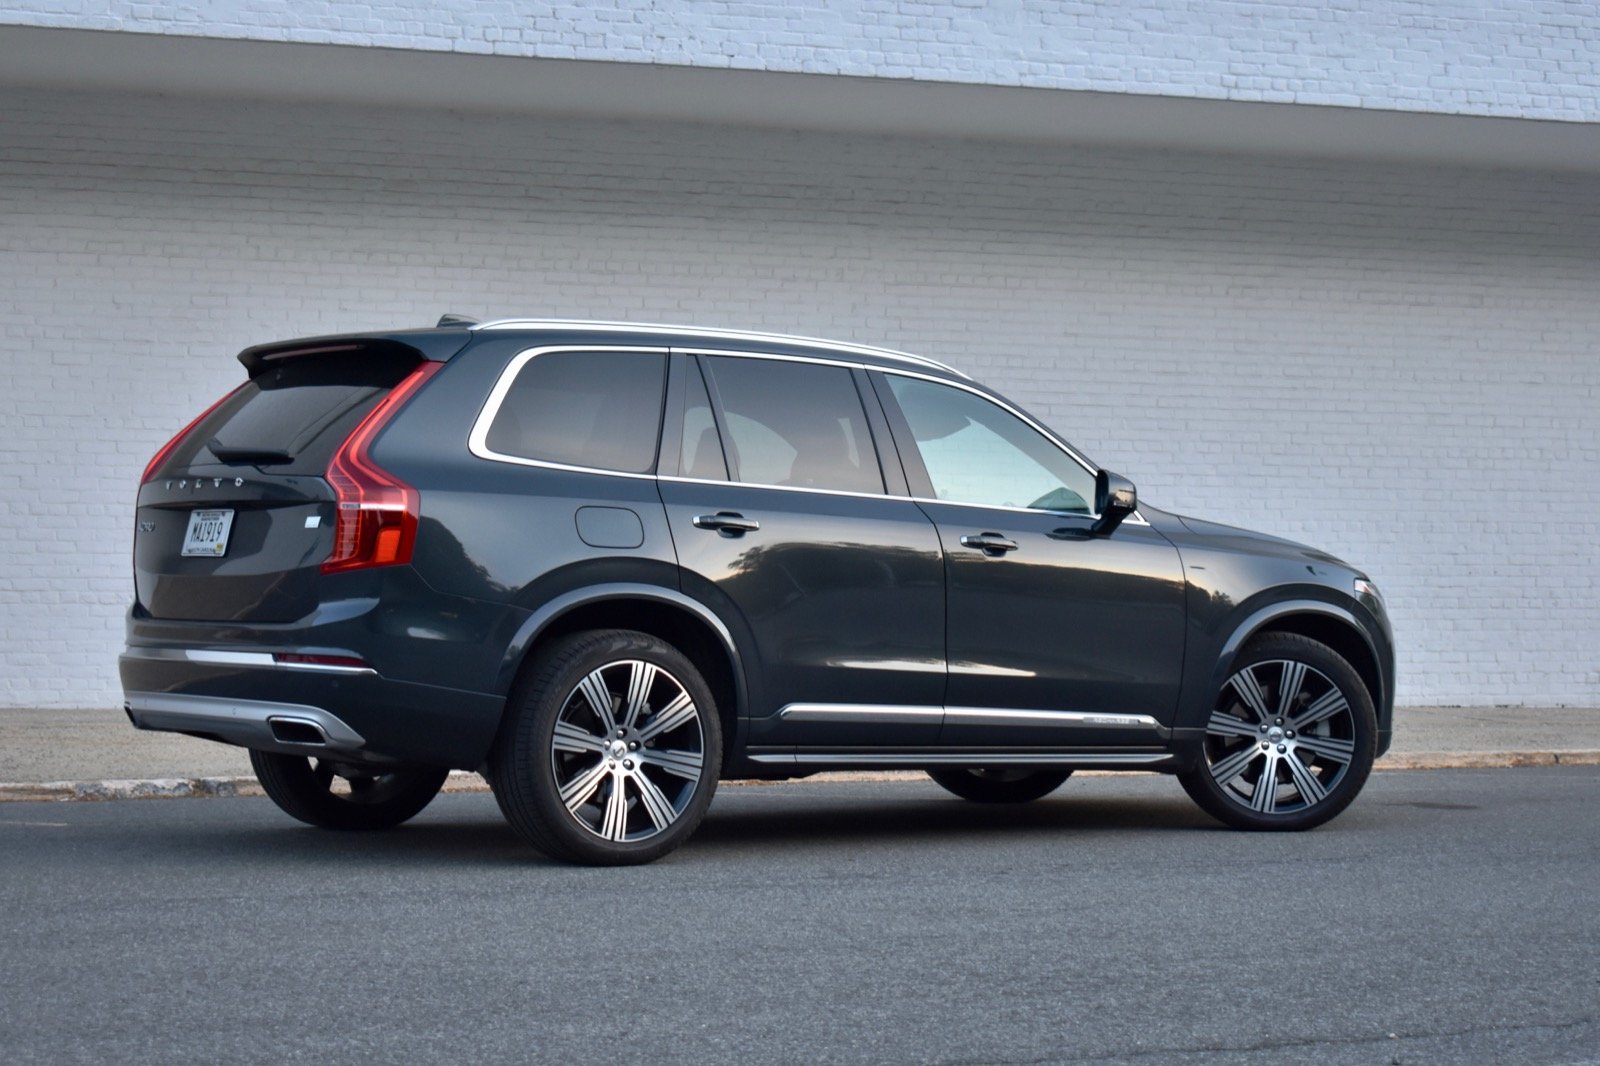 2021 Volvo XC90 Test Drive Review